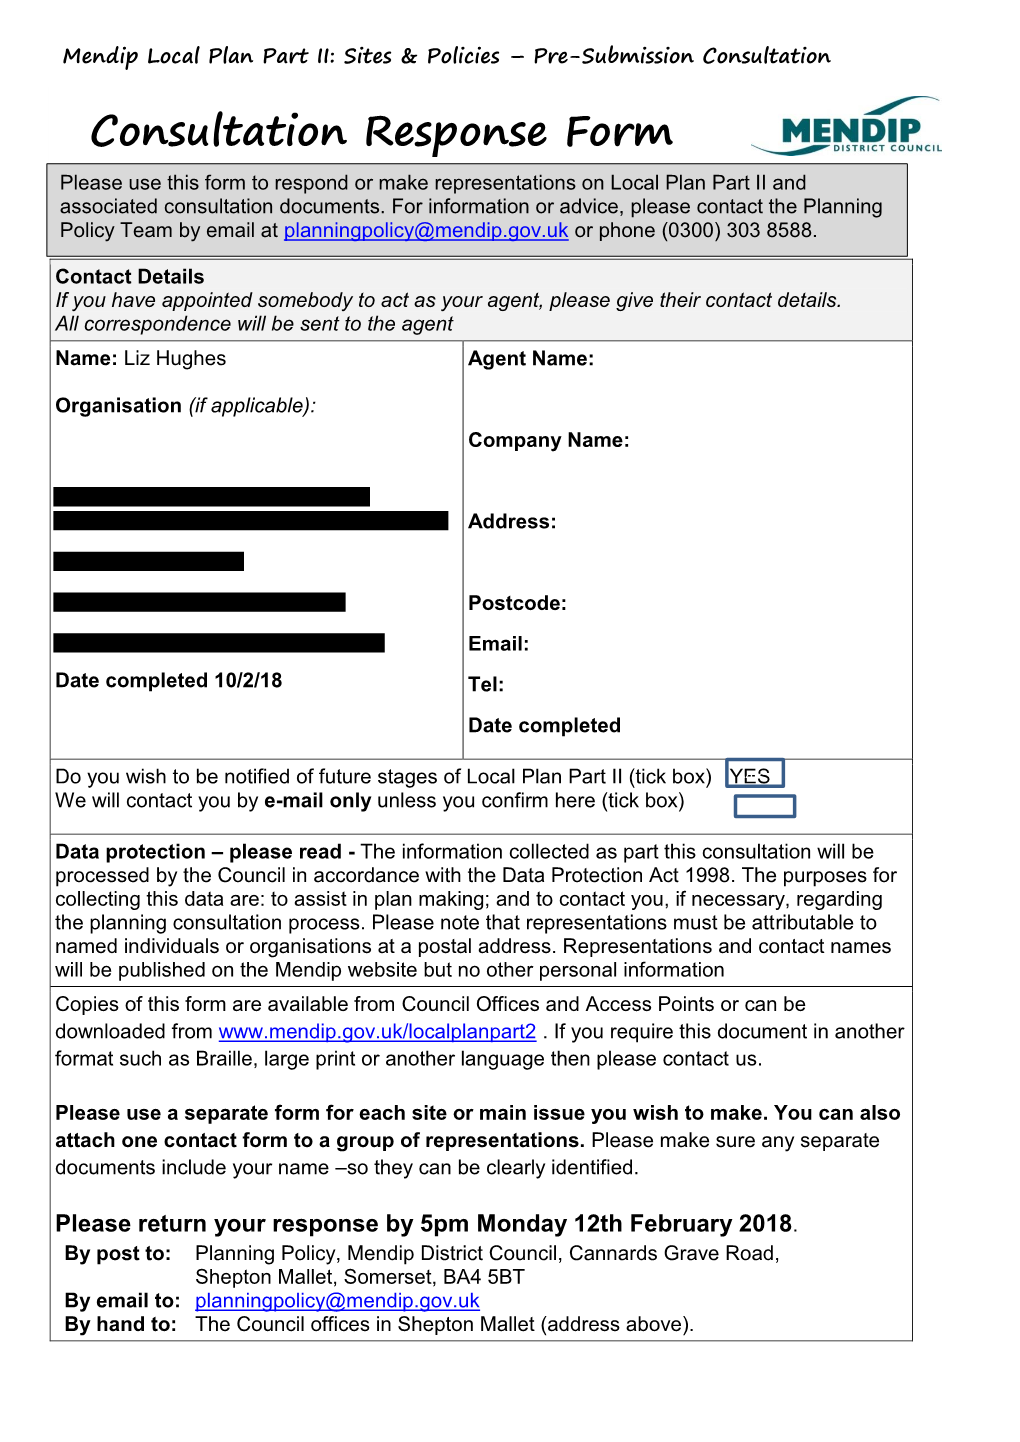 Consultation Response Form Please Use This Form to Respond Or Make Representations on Local Plan Part II and Associated Consultation Documents